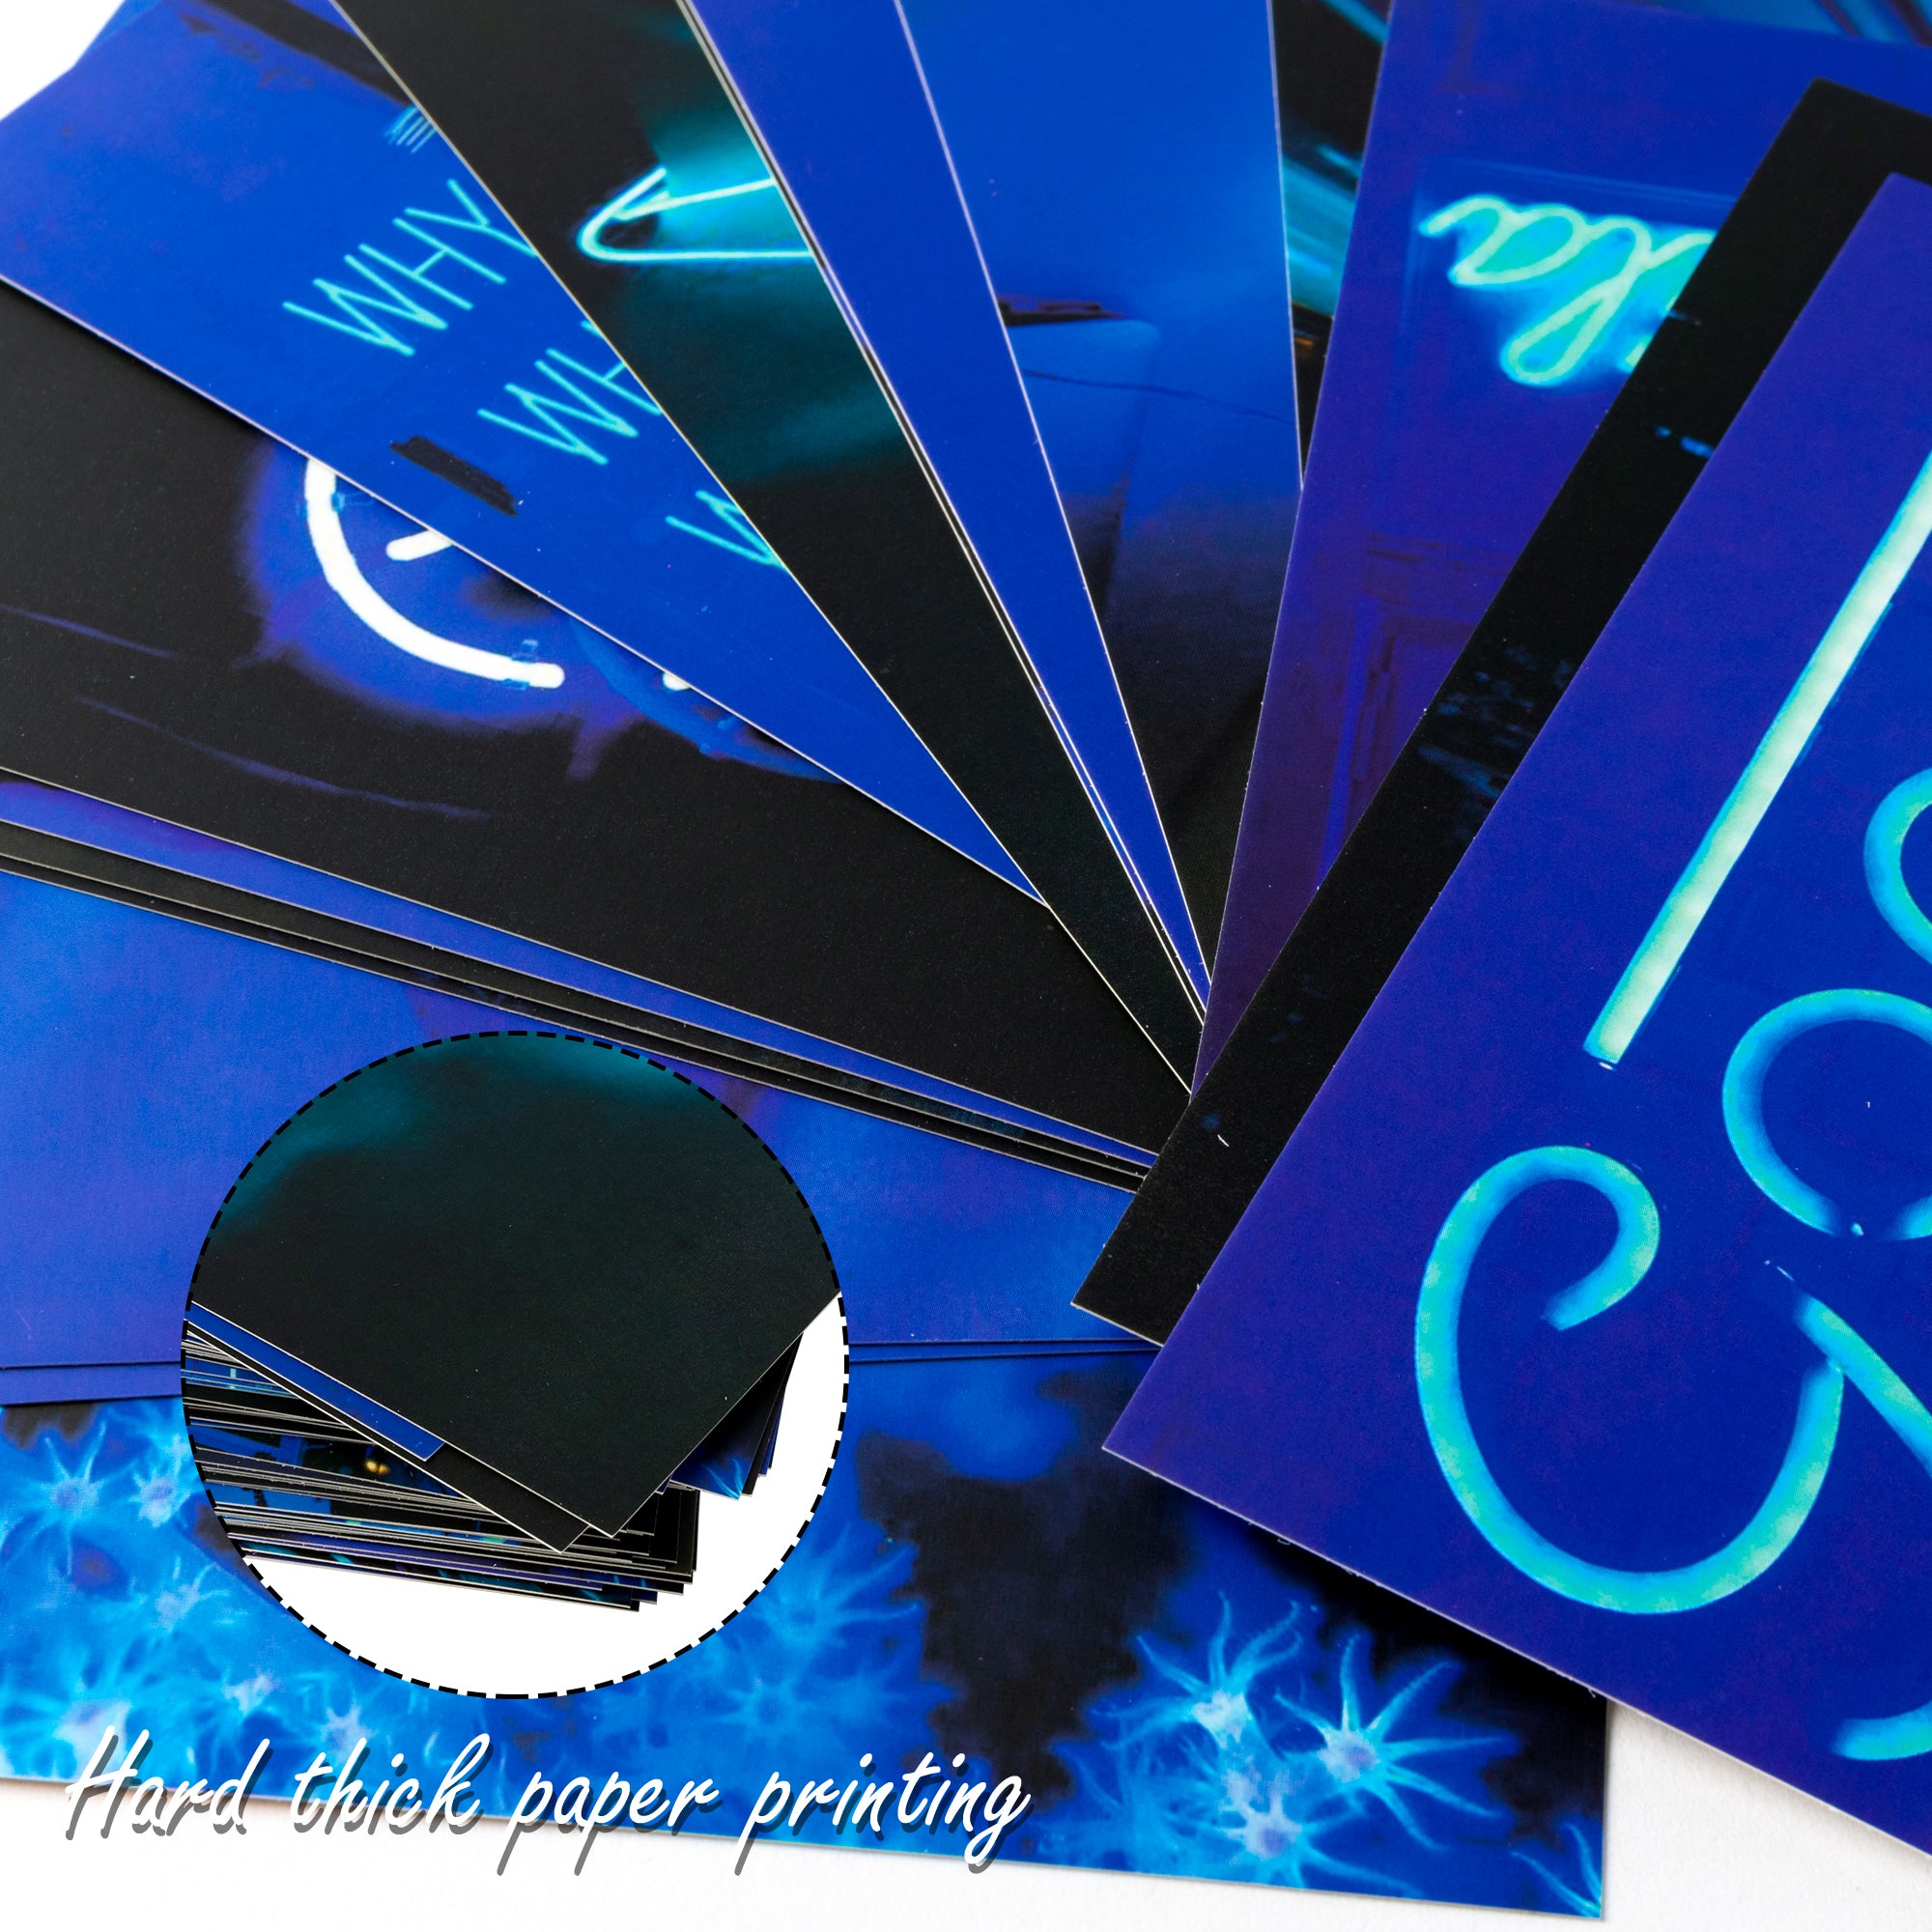 50PCS Blue Neon Aesthetic Pictures Wall Collage Kit, Trendy Wall Prints Kit, Small Posters for Room Bedroom Aesthetic